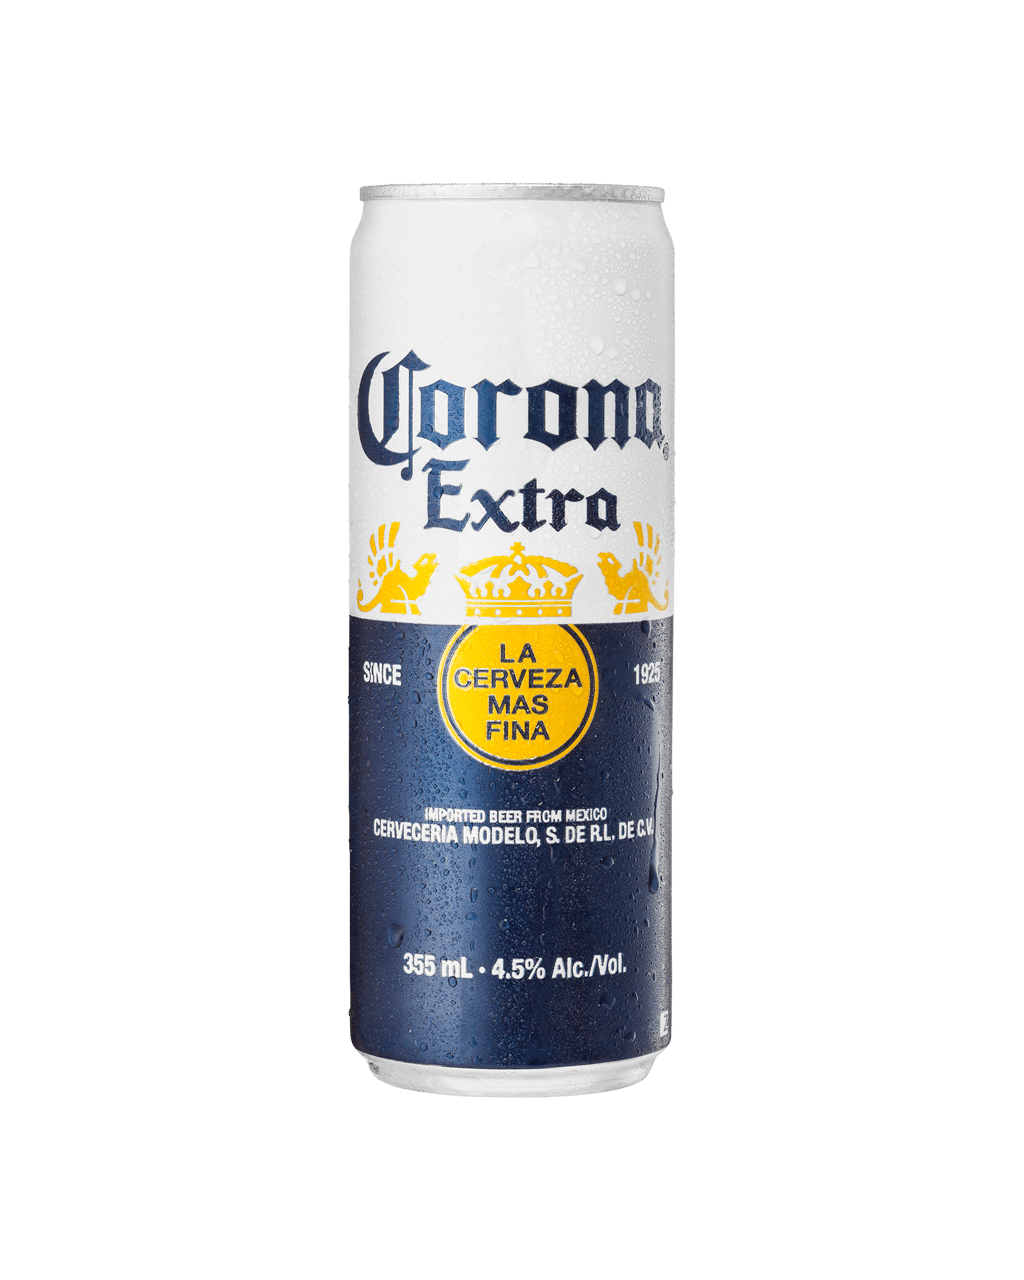 Buy Corona Extra Beer Cans 10 Pack 355ml Online Lowest Prices In